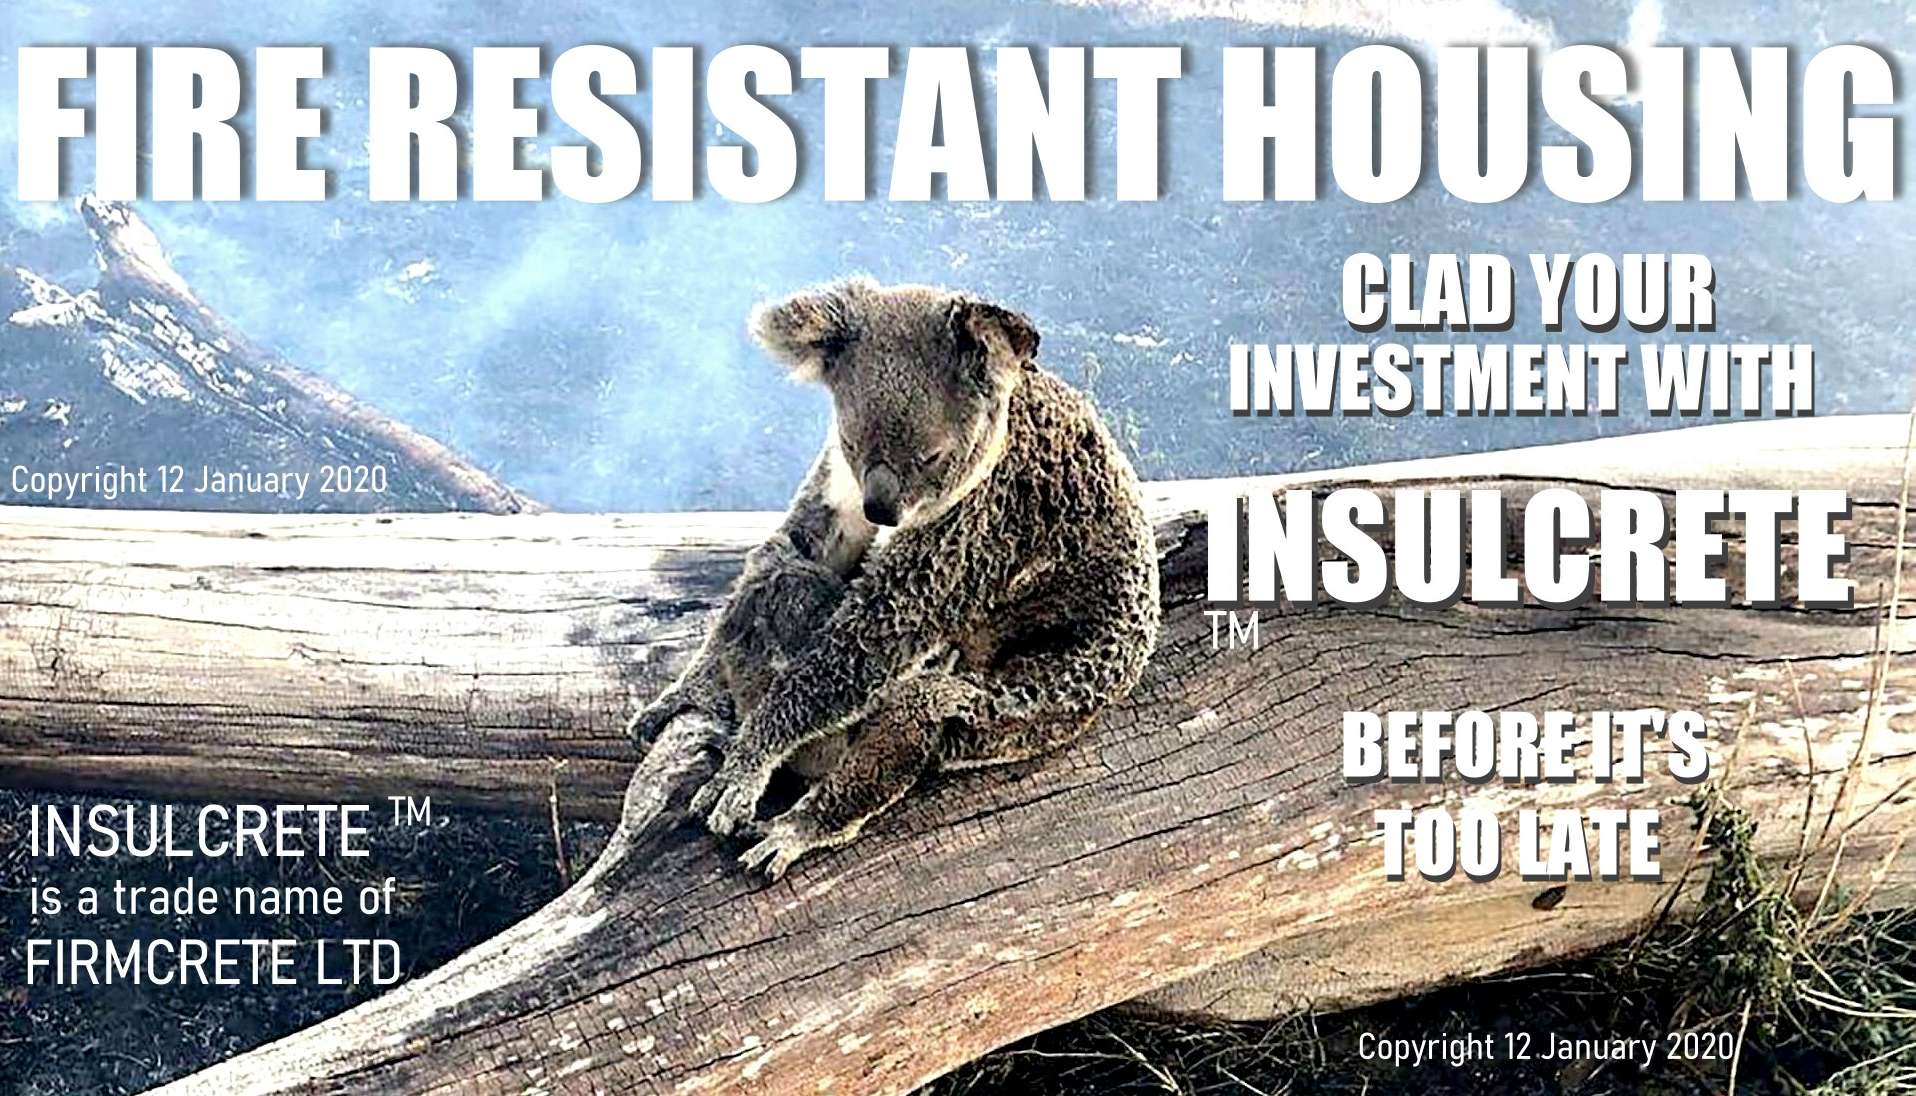 This koala bear cannot control its future, you can. Build fireproof houses in bushfire area